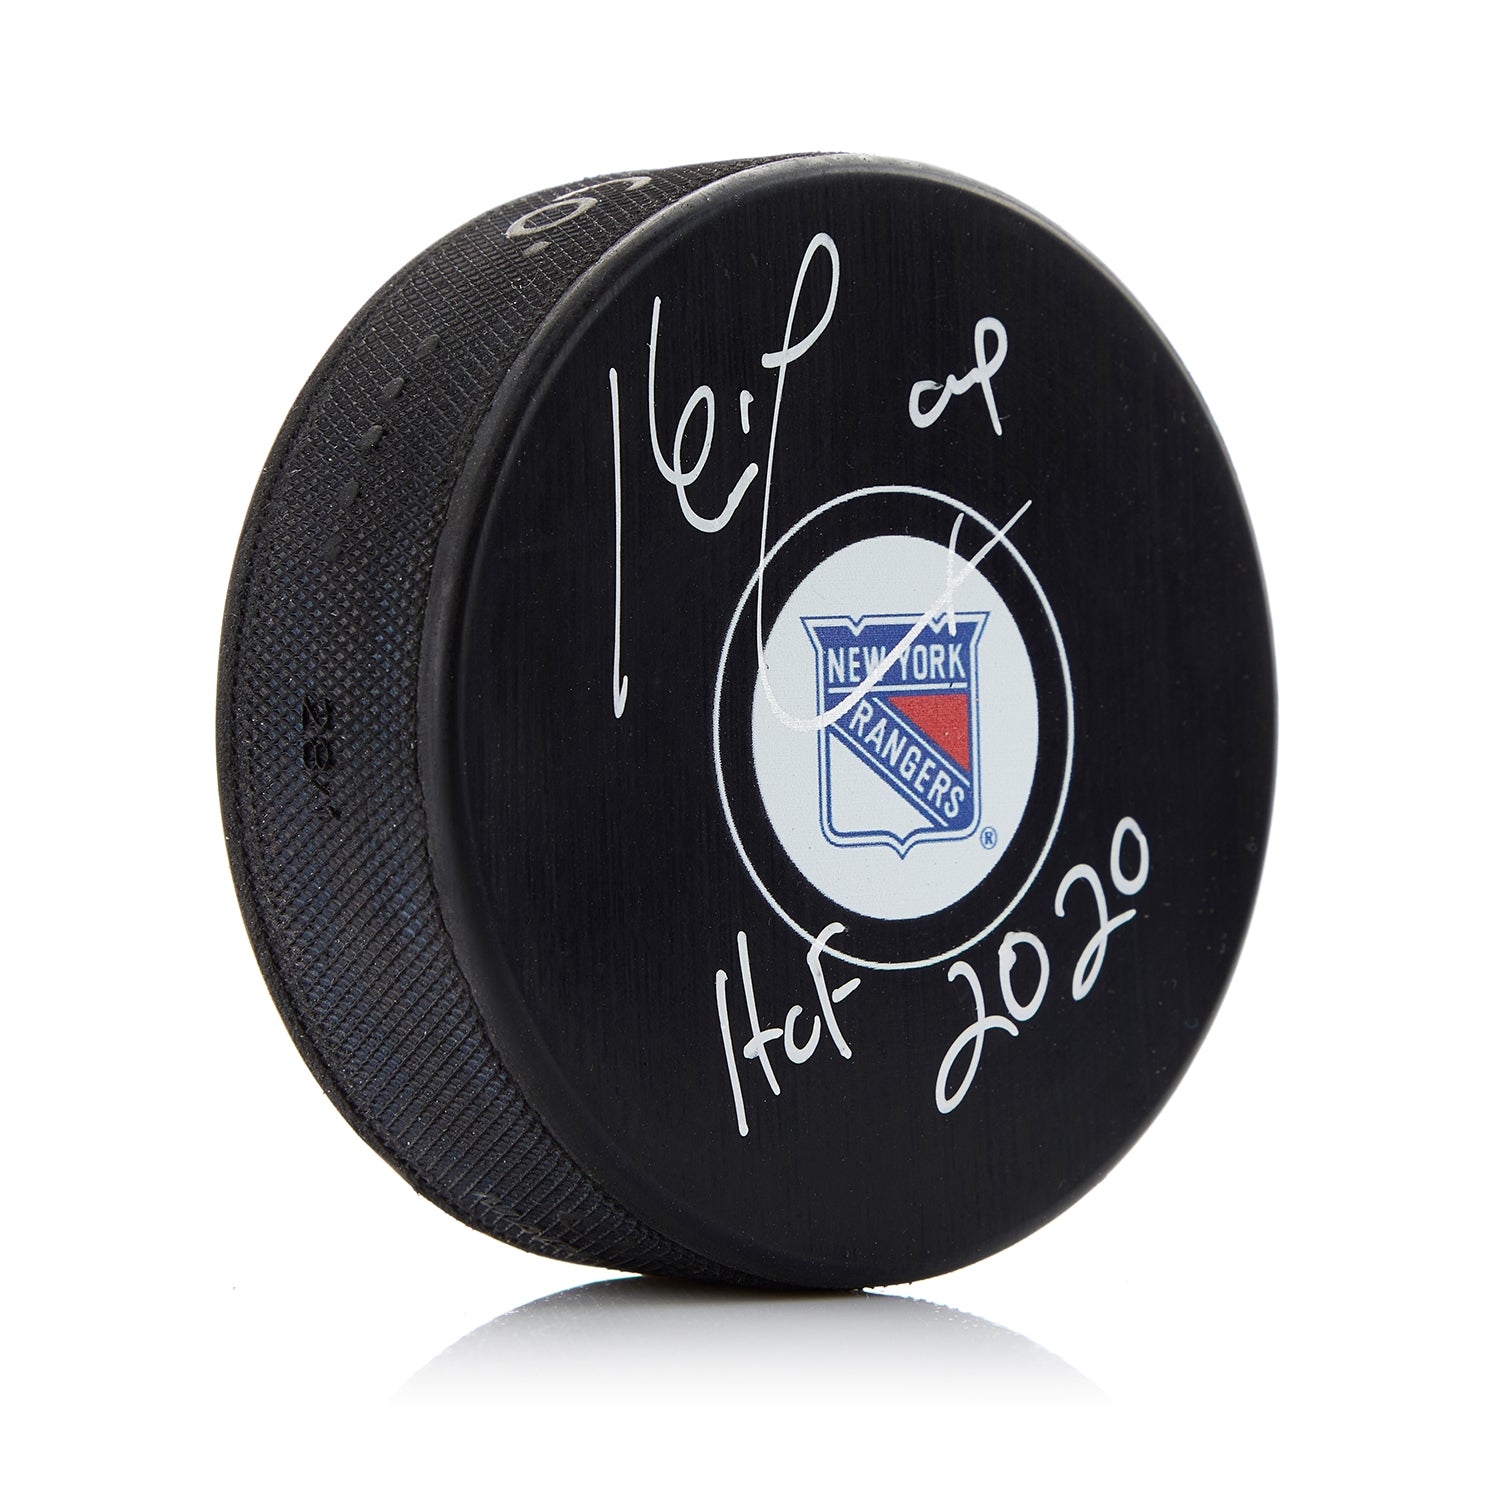 Kevin Lowe New York Rangers Signed Hockey Puck with HOF Note